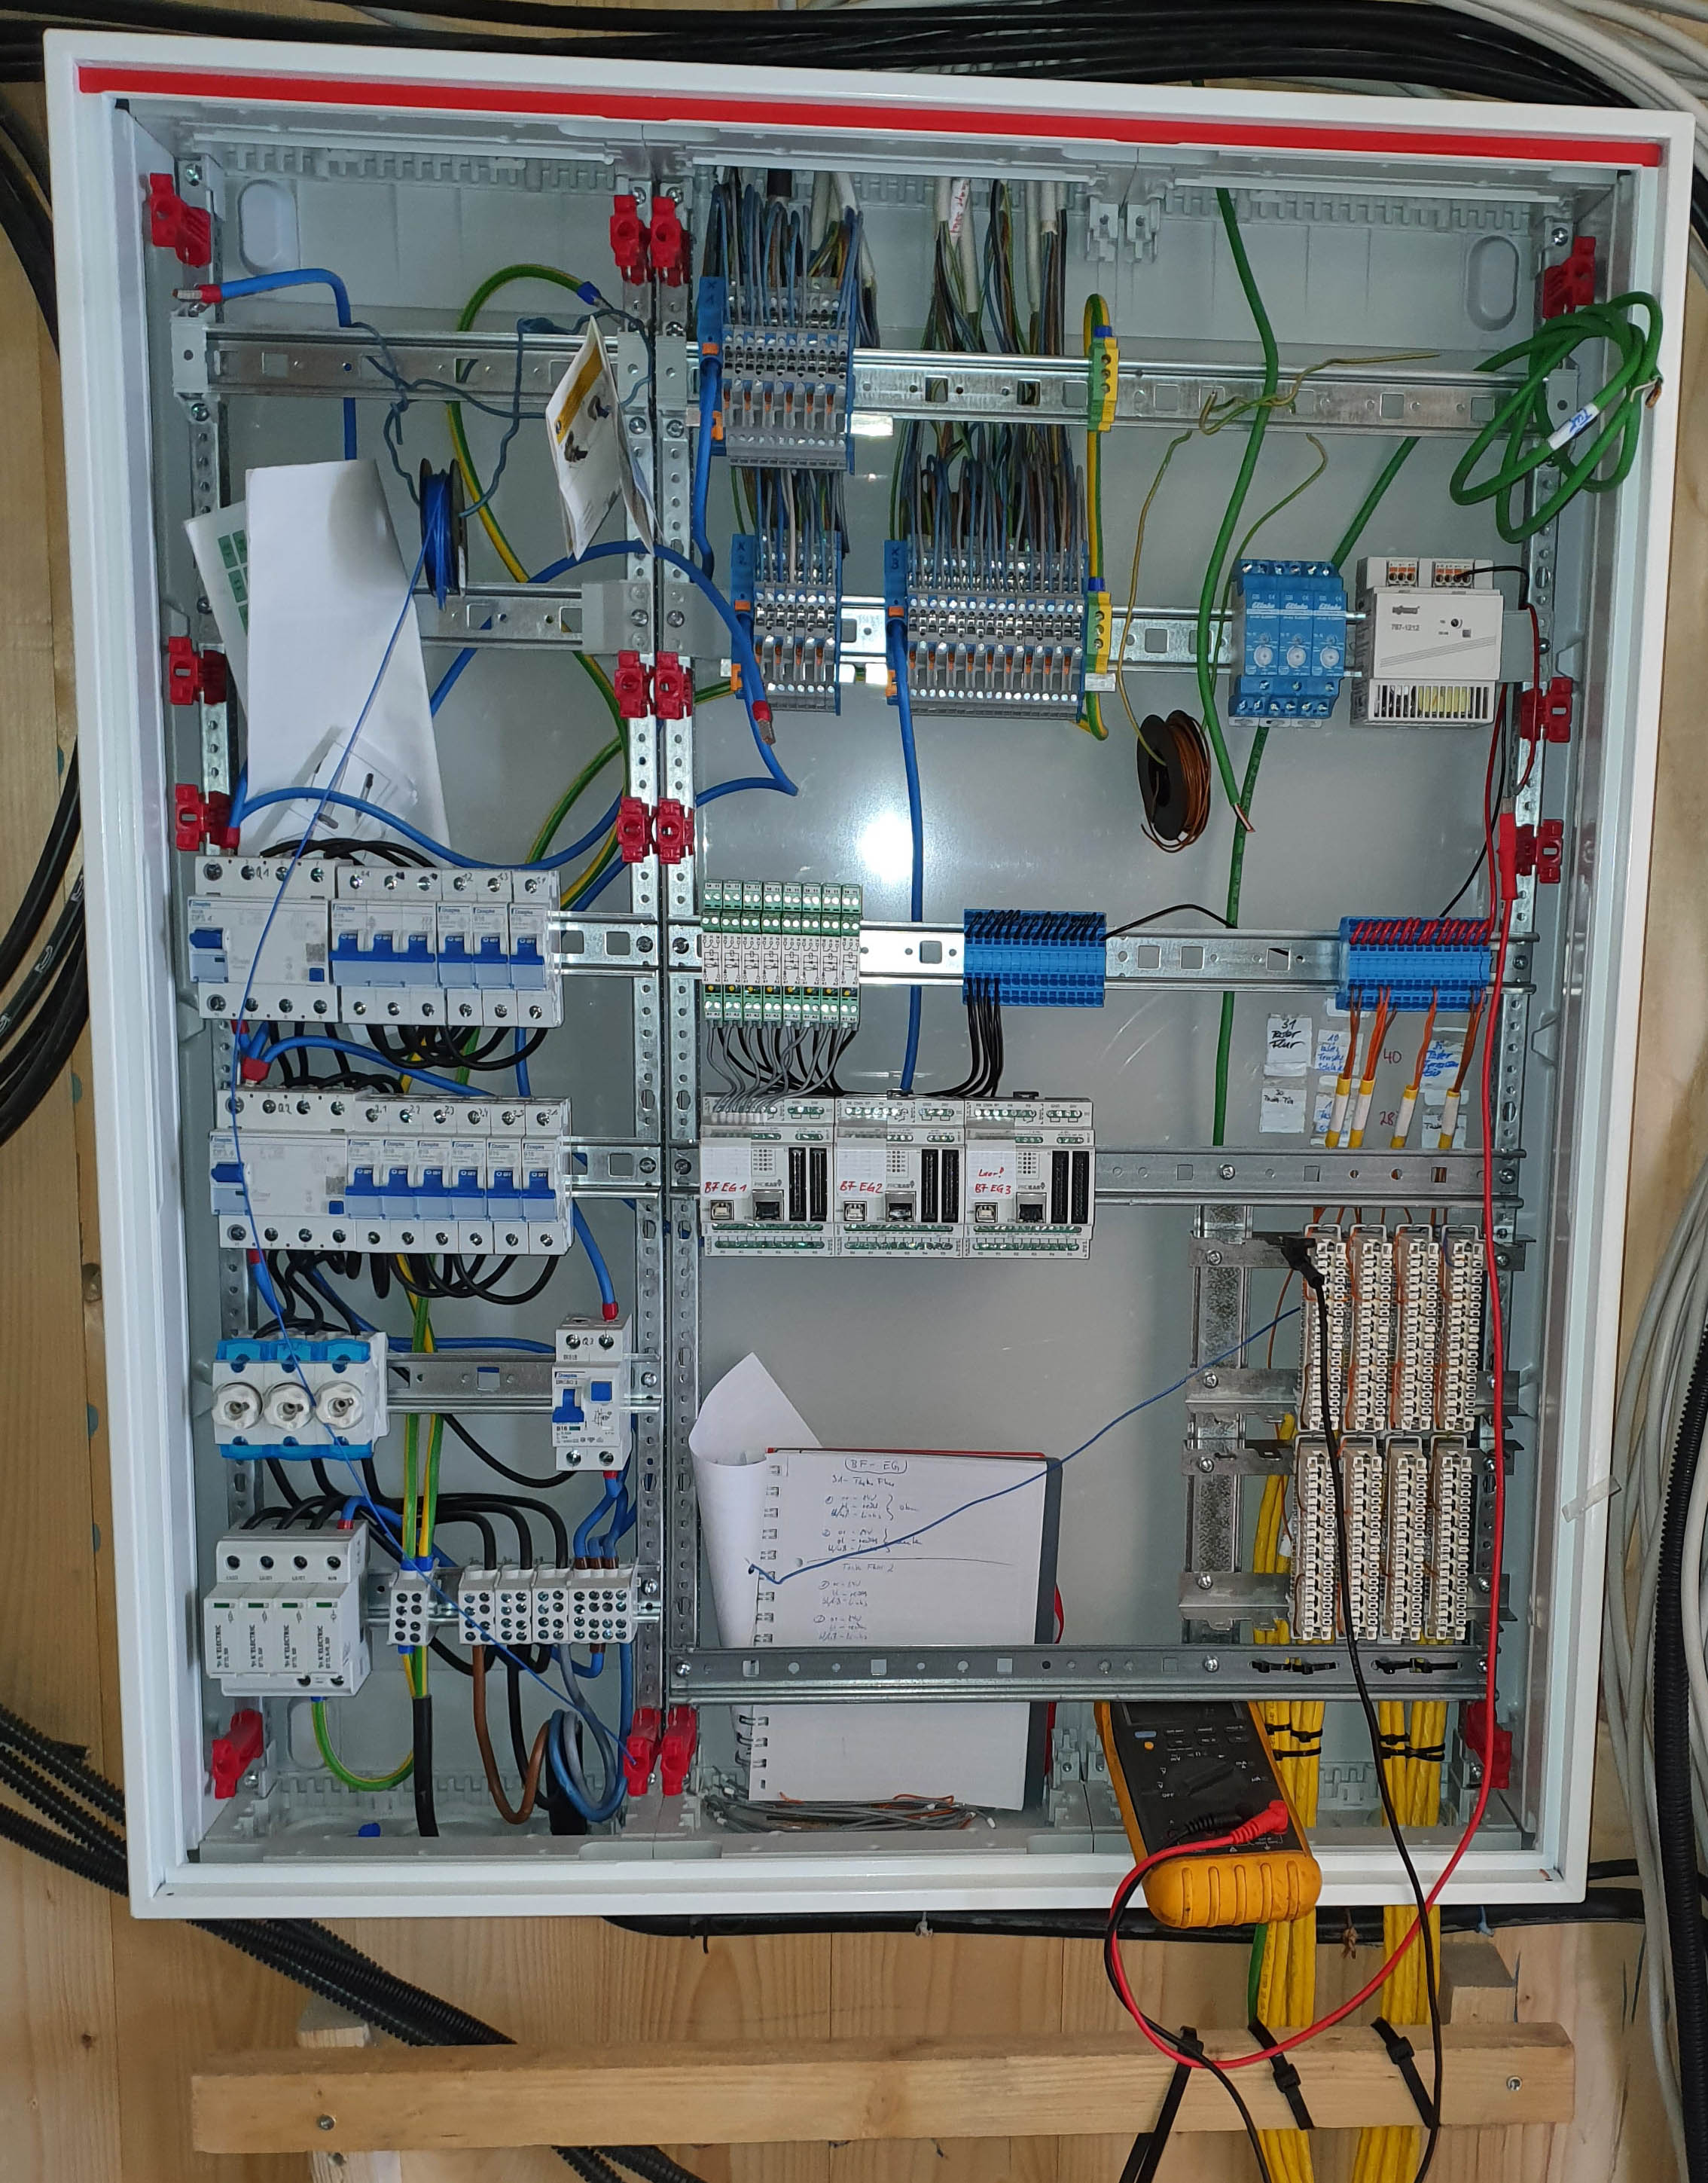 offenes-smarthome-system-prototyp-fuer-jedermann-517011-1.jpg